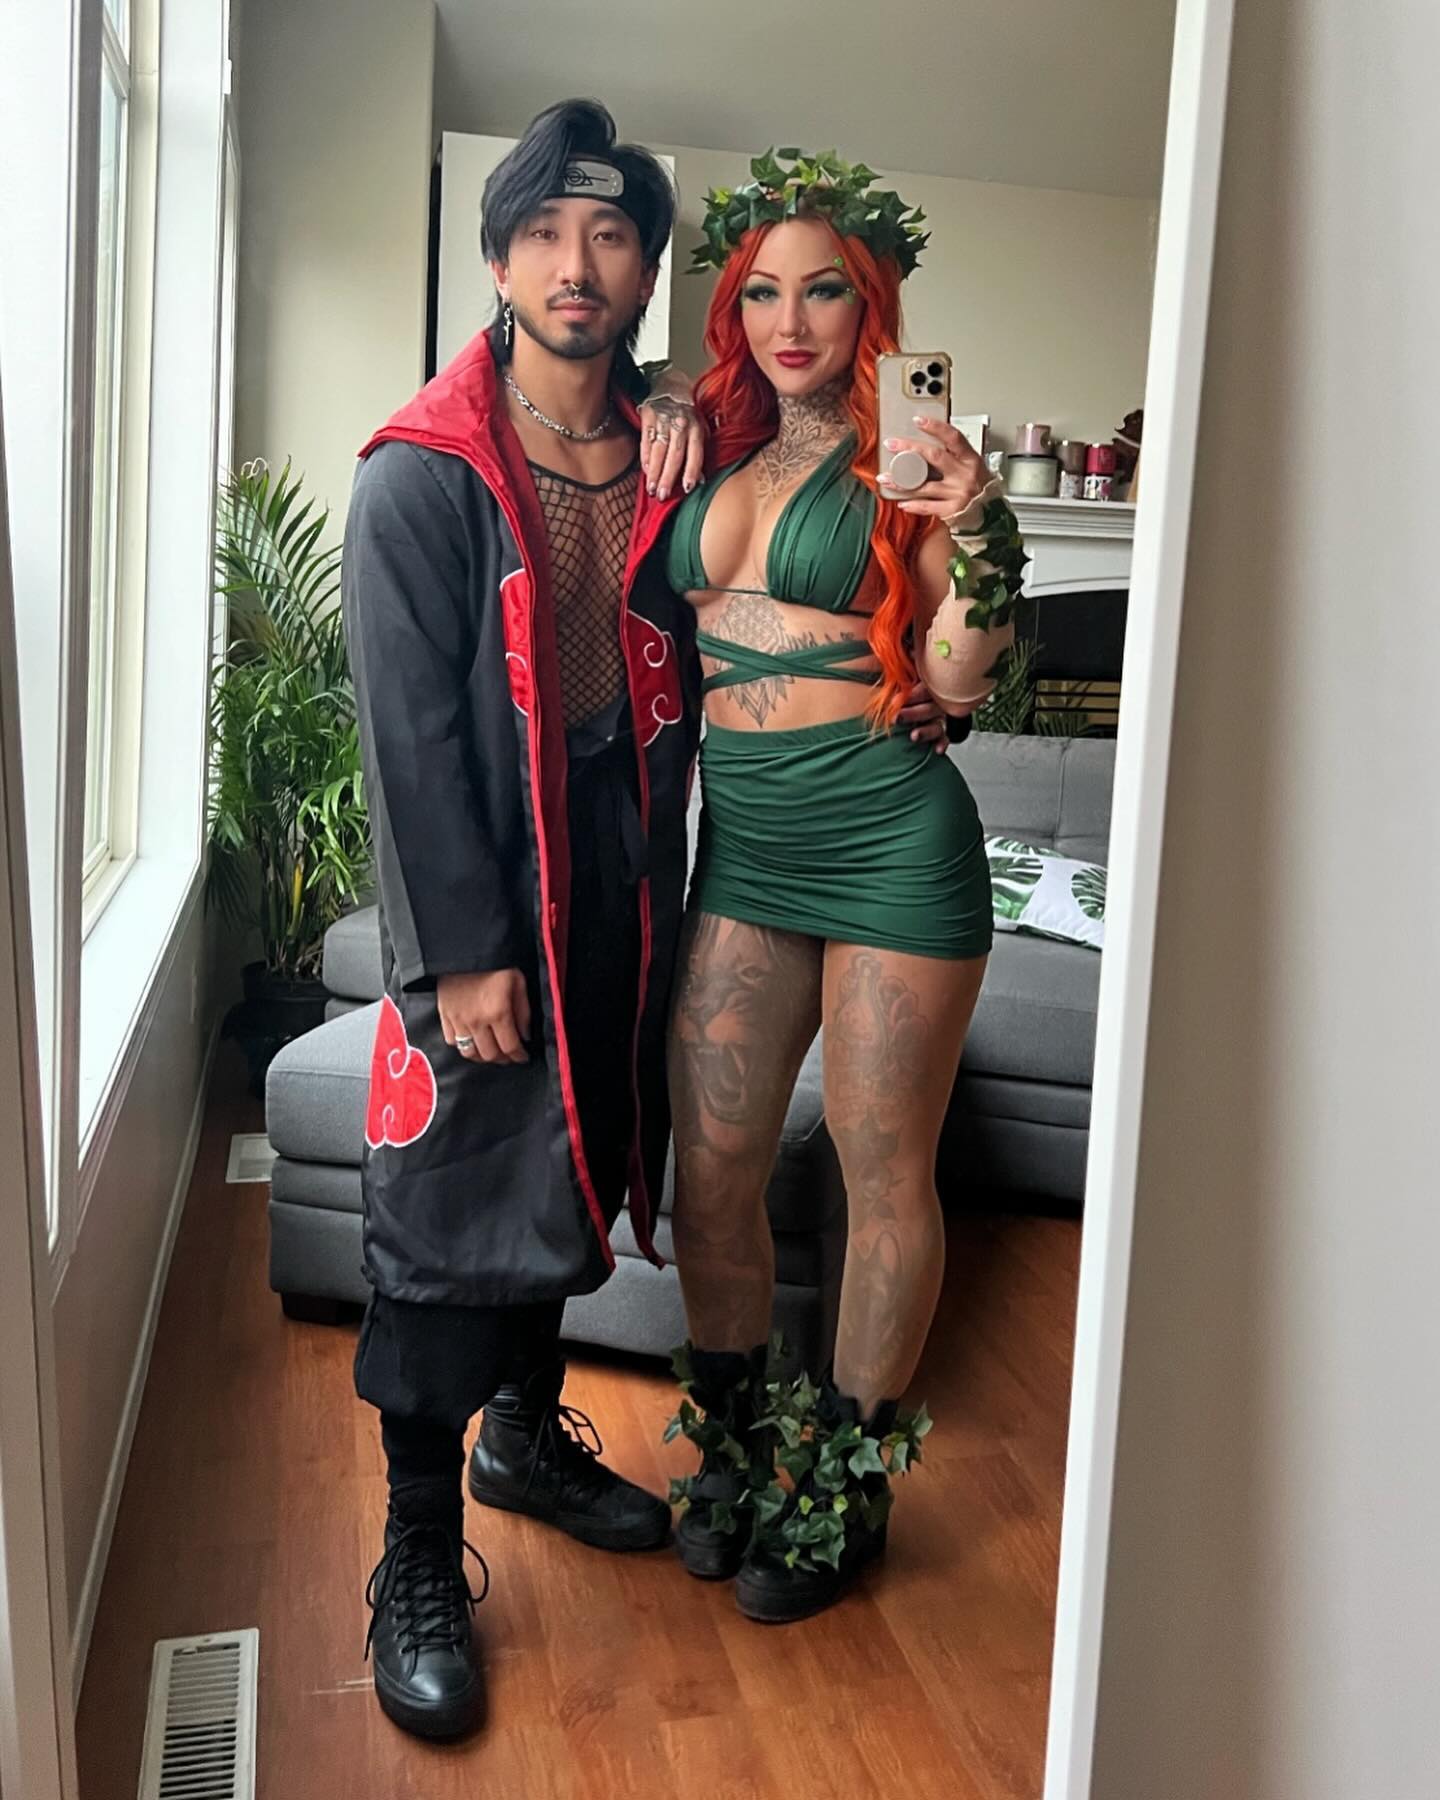 Itachi x Poison Ivy. Why does it kind of make sense though 😏 
#costumeparty #itachicosplay #poisonivycosplay #cosplaycouple